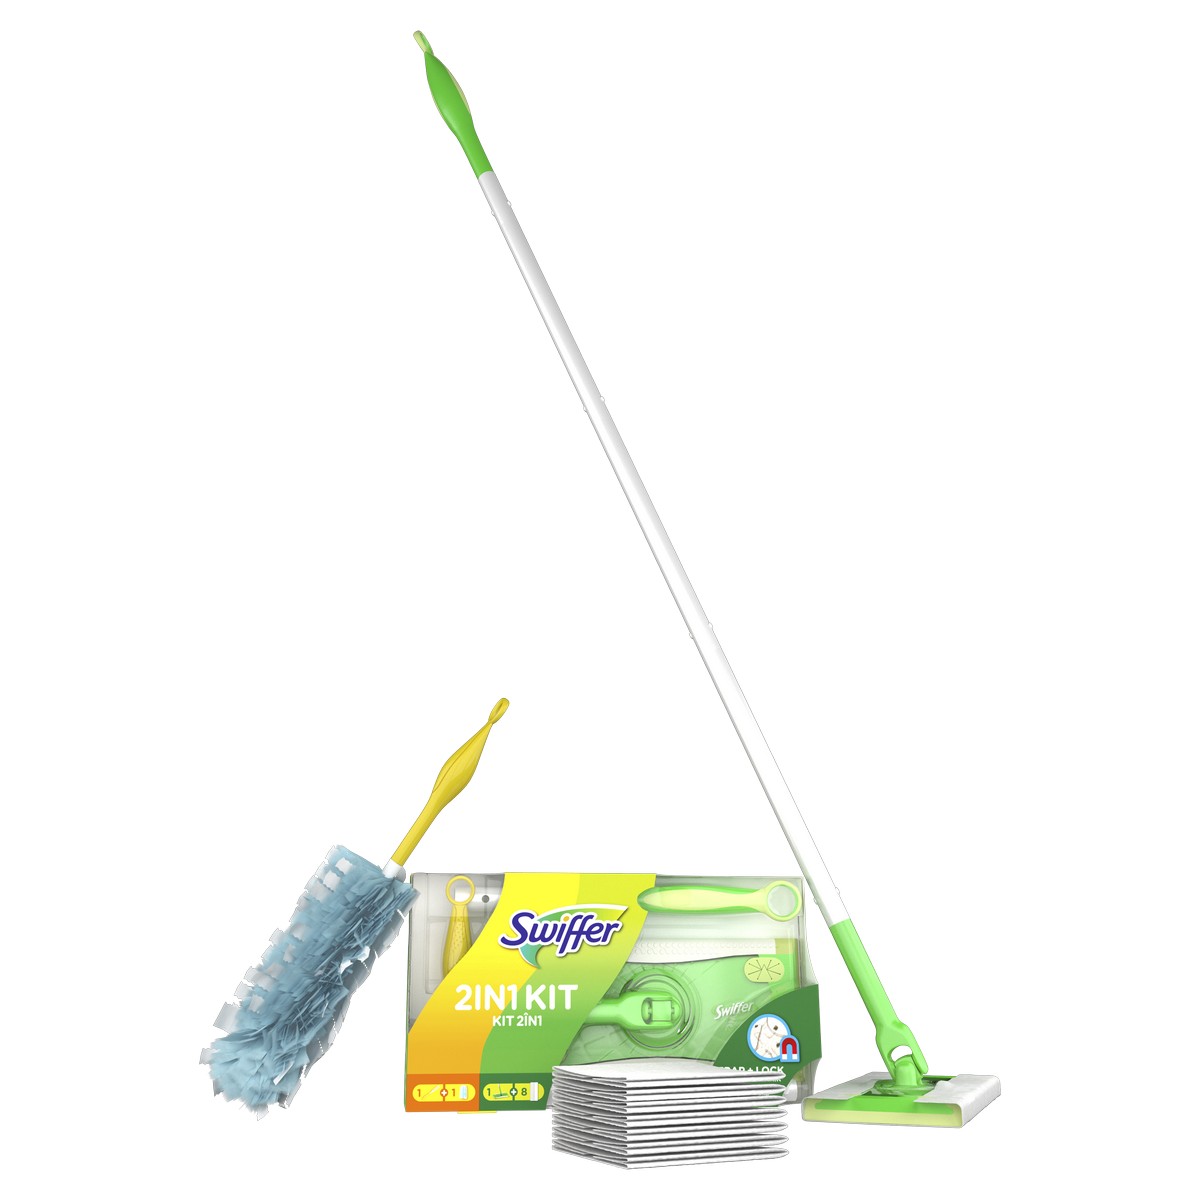 SWIFFER 2IN1 KIT (MOP AND PRACHOVKA)